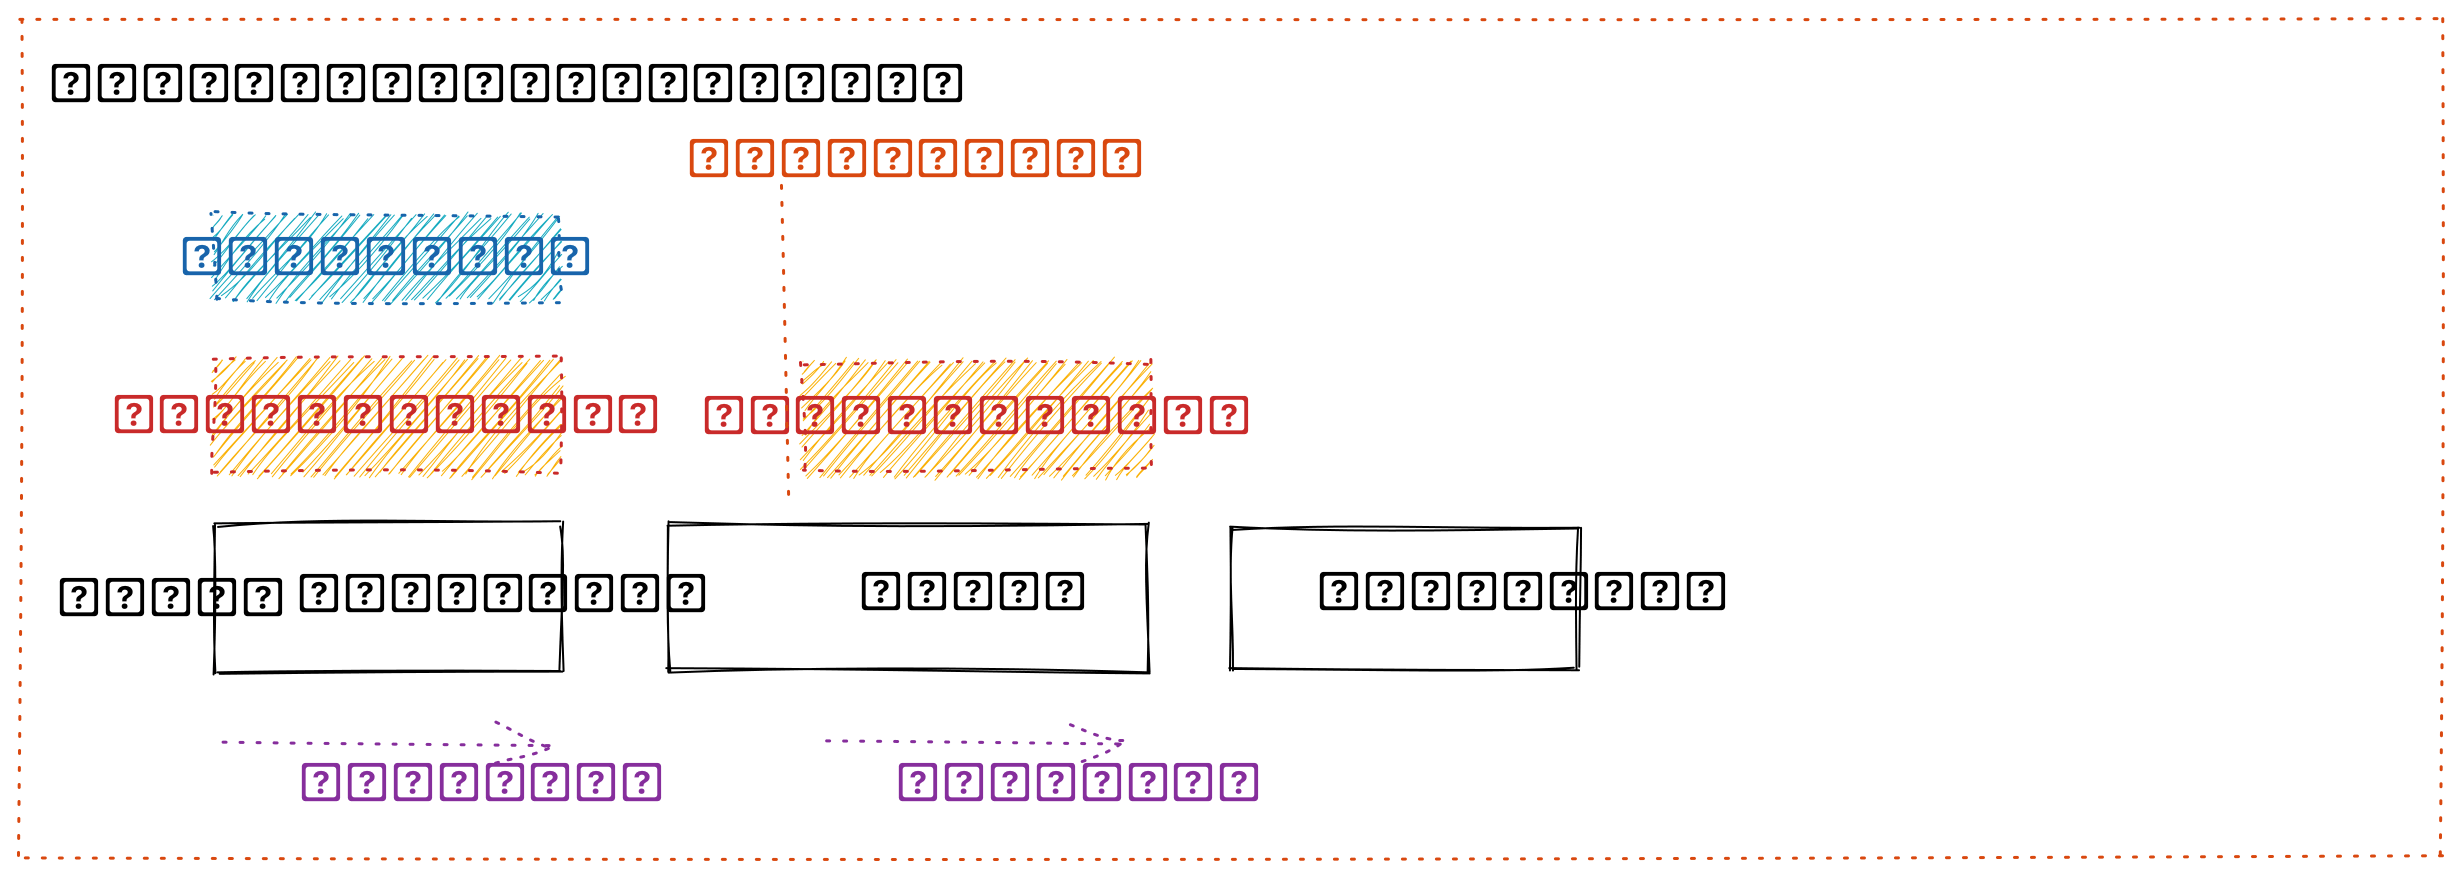 A Diagram illustrating the fetch and revalidate pattern in SWR.